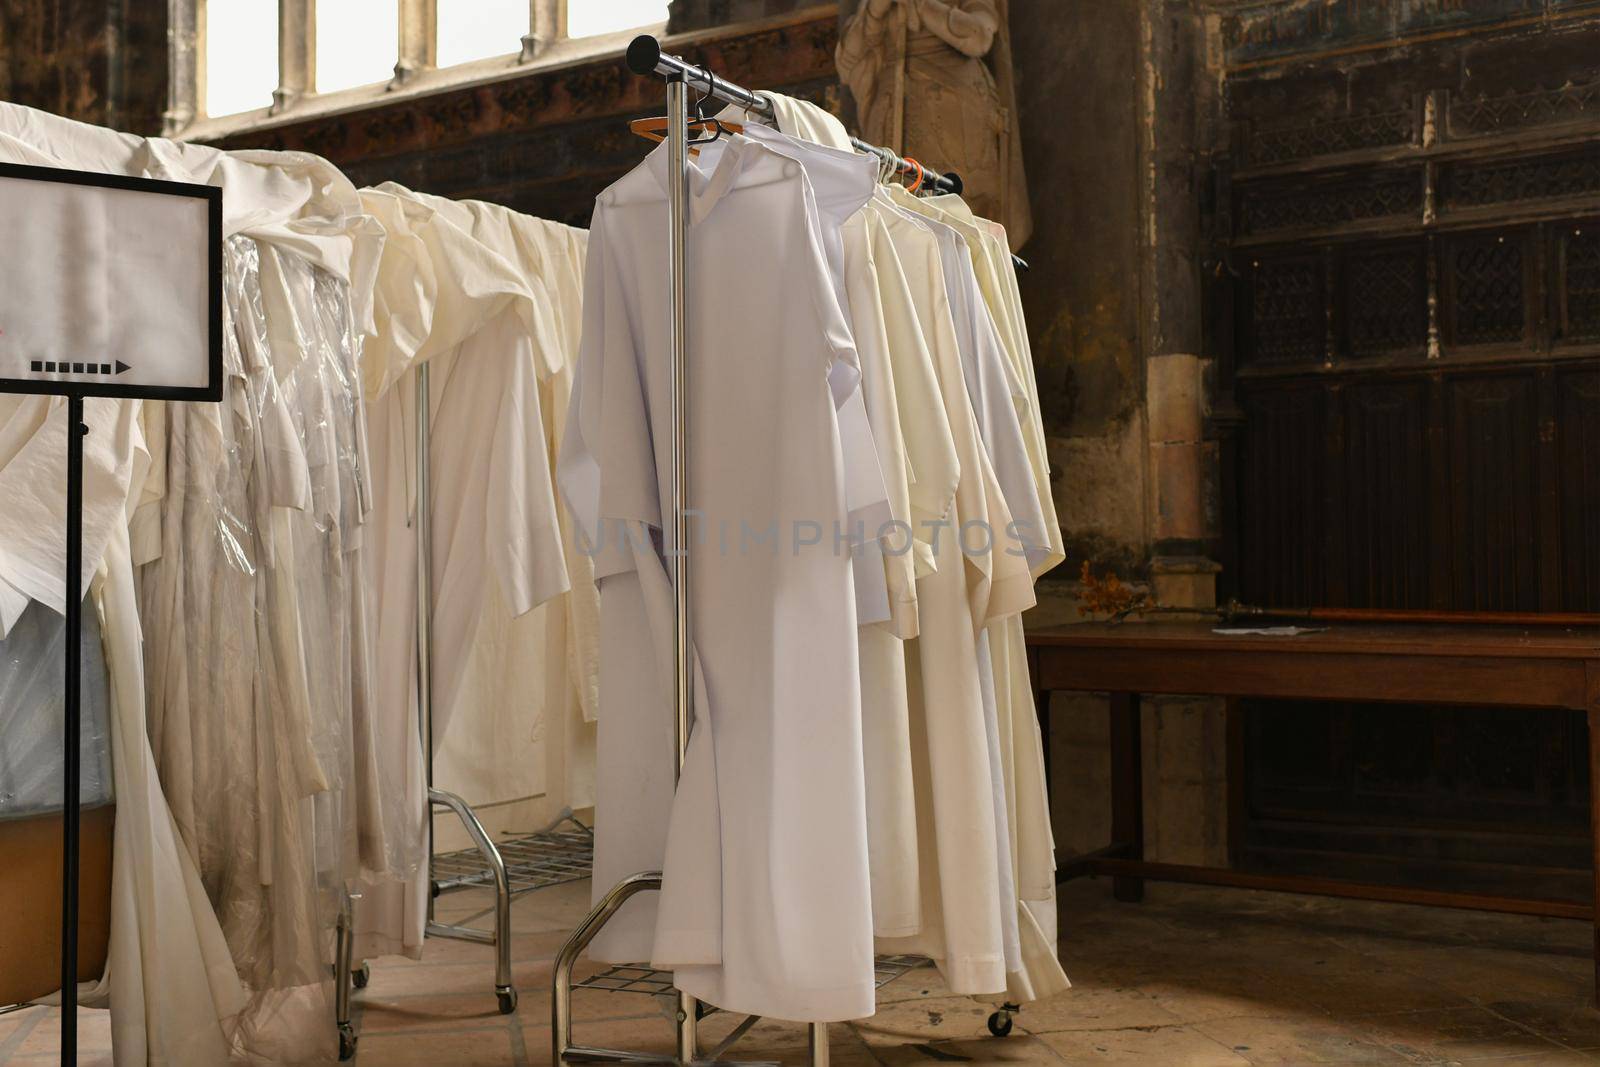 Chasubles or dress of the priest in a Catholic church